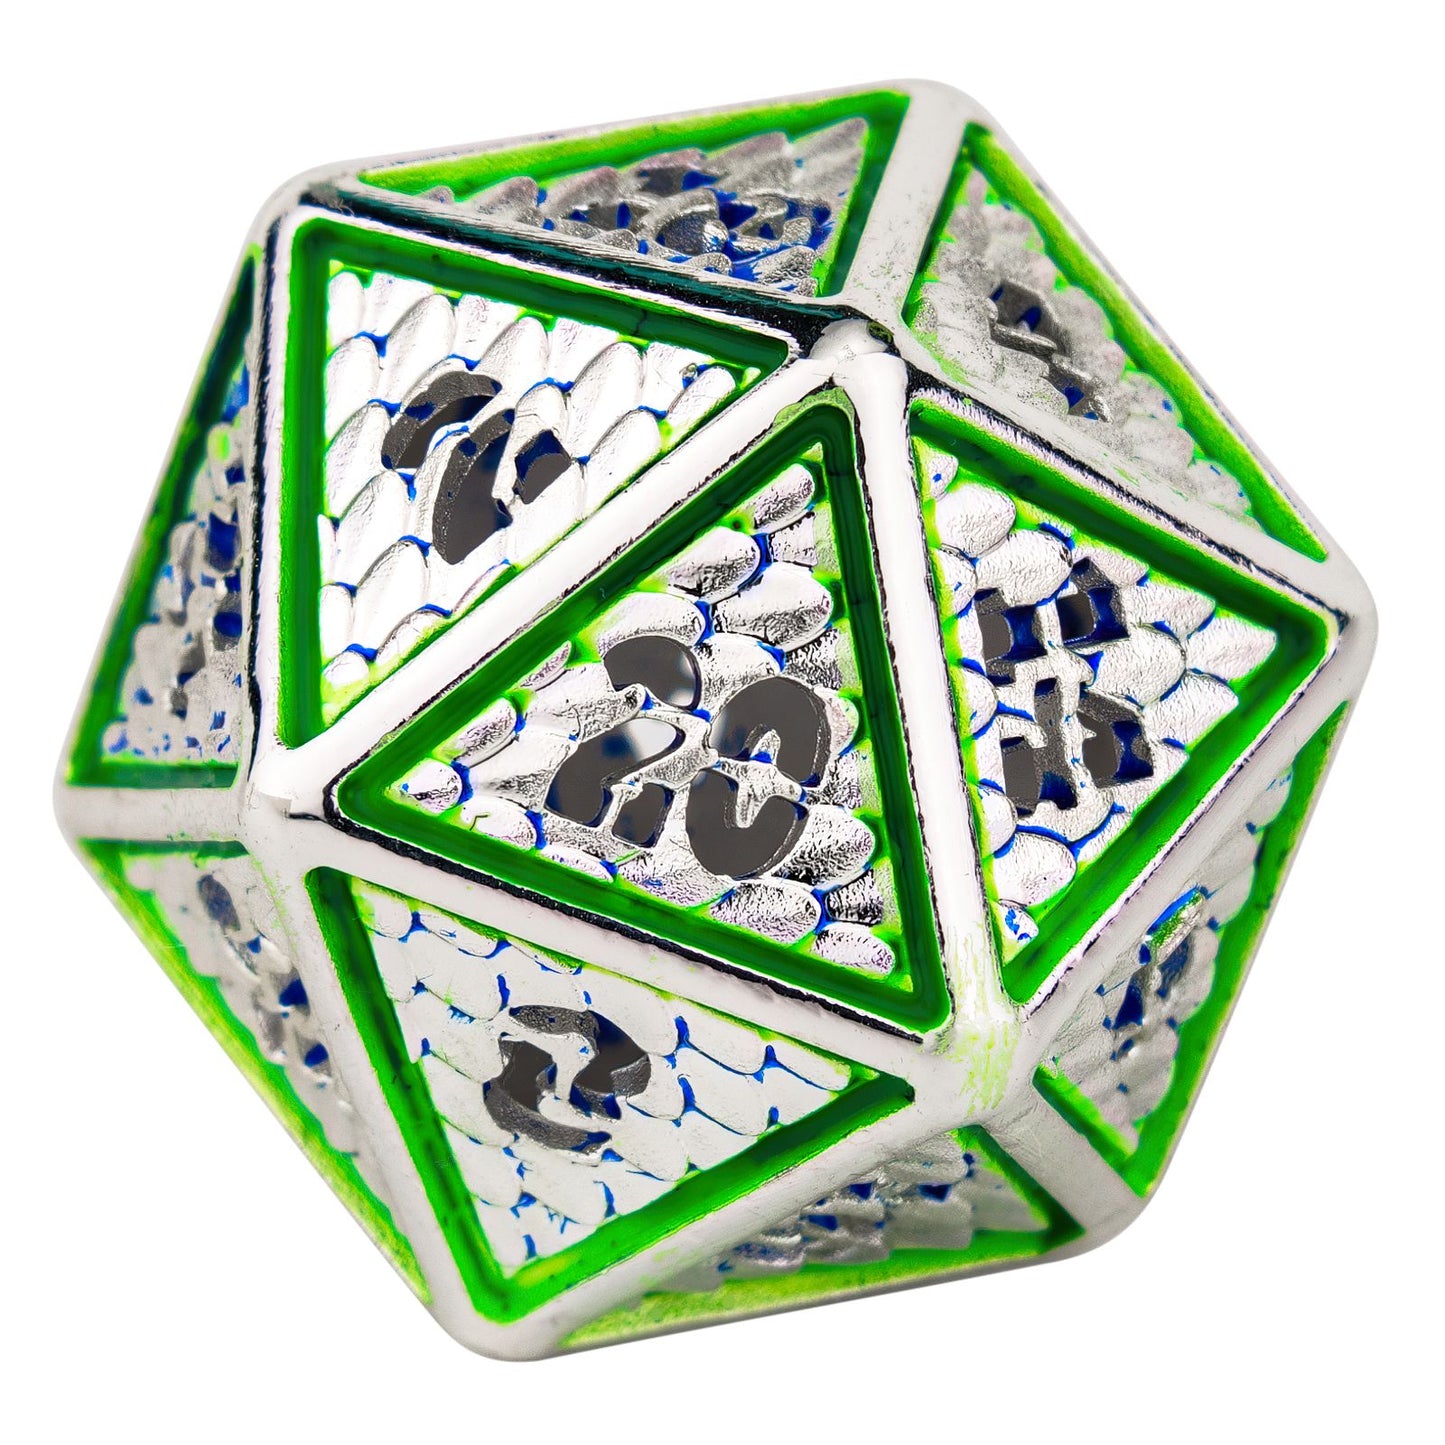 Hollow Wyvern single D20 Silver with Green/Blue